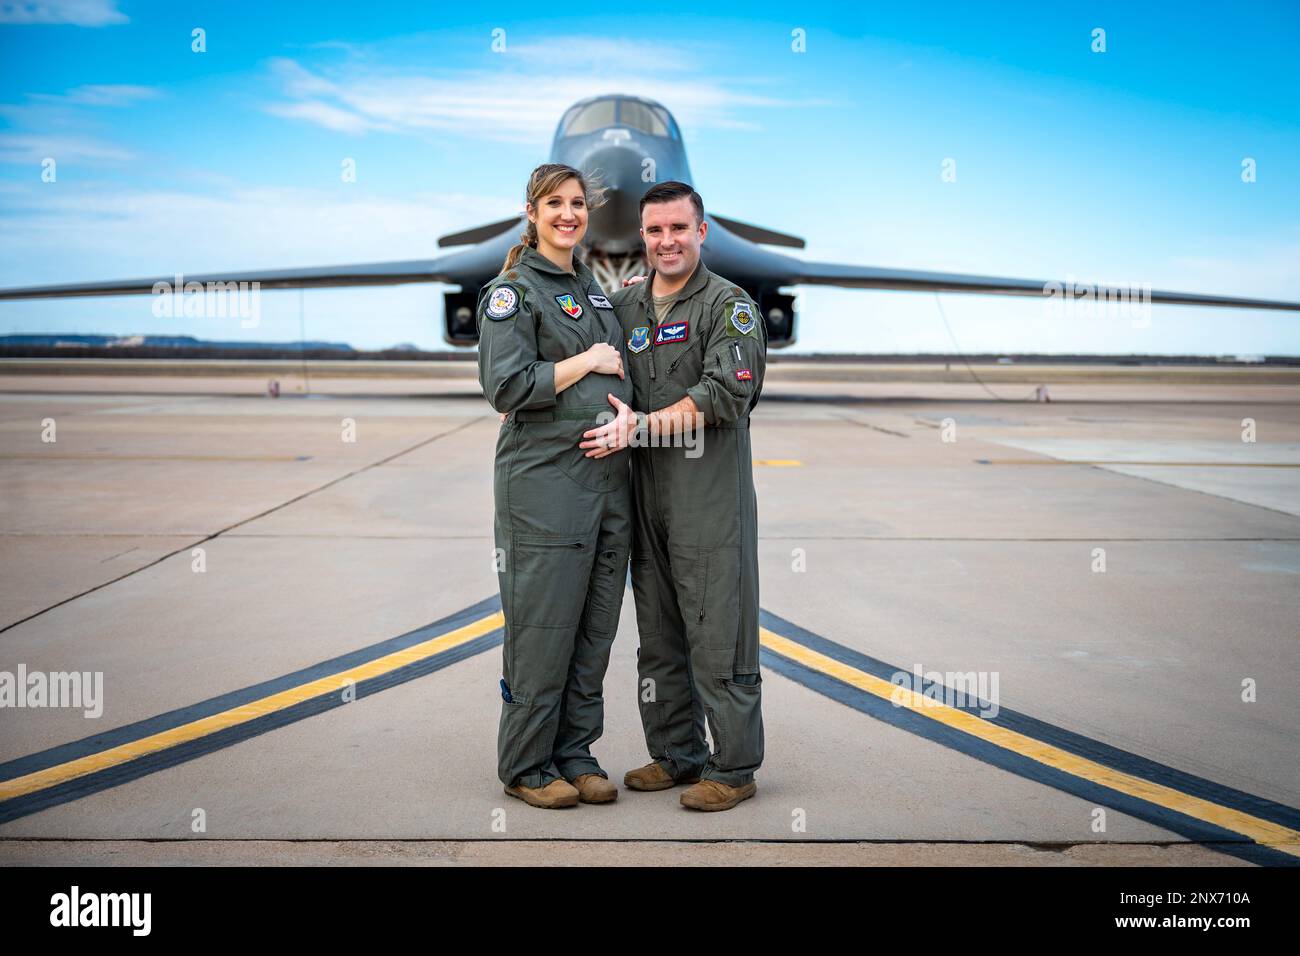 U.S. Air Force Maj. Lauren Olme, 77th Weapons Squadron assistant director of operations, and her husband, Maj. Mark Olme, 7th Operations Support Squadron bomb wing weapons officer, pose for a photo next to a B-1B Lancer at Dyess Air Force Base, Texas, Feb. 20, 2023. Lauren, who is currently pregnant, can continue flying after recently getting approved under the Air Force’s new guidance which allows female aircrew members to voluntarily request to fly during pregnancy. No waiver is required to fly in the second trimester with an uncomplicated pregnancy in a non-ejection seat aircraft if all fli Stock Photo